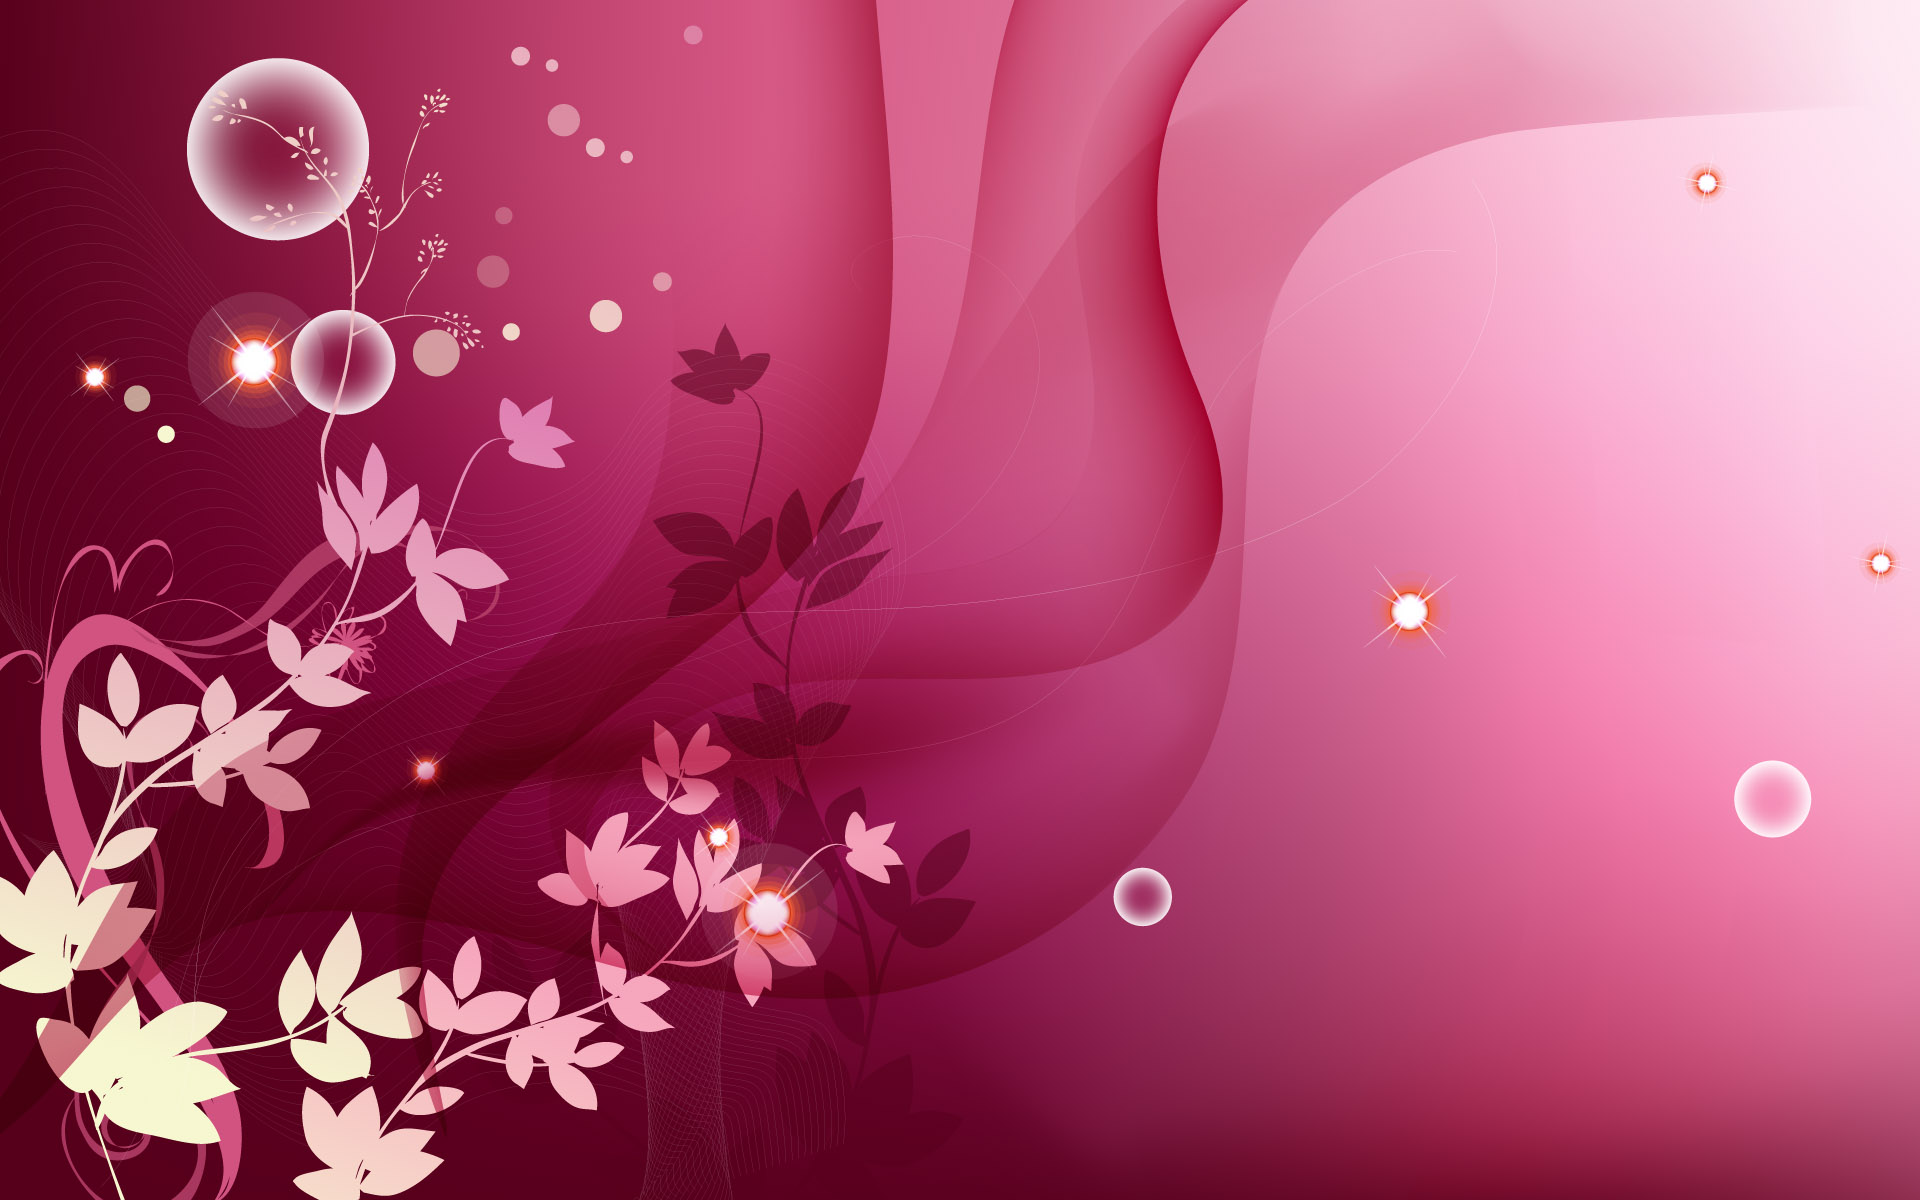 pink Flowers And Bubble HD Wallpaper Widescreen For PC Desktop